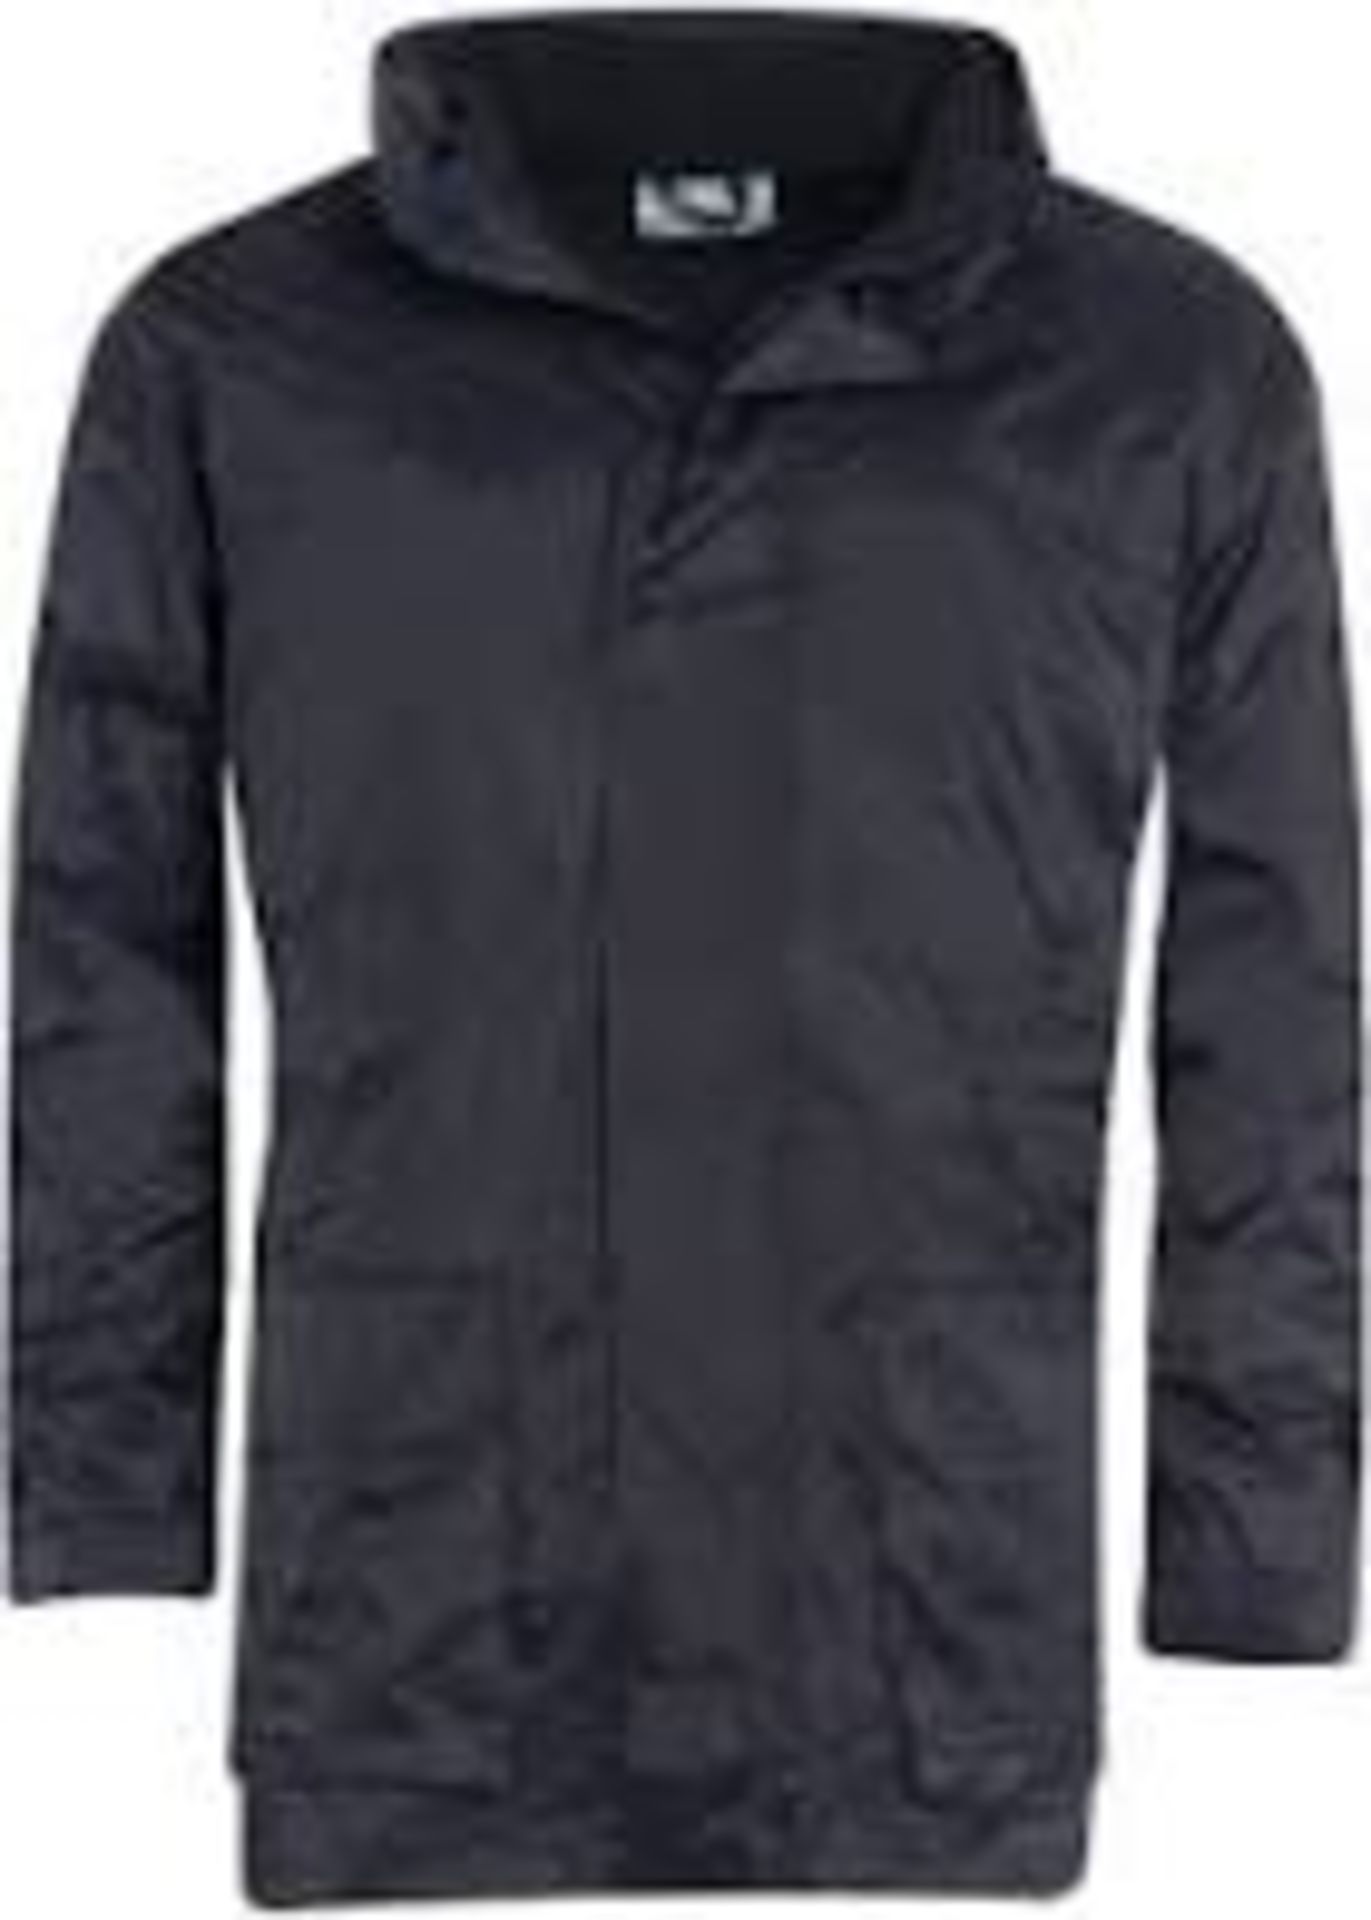 Banner Sport Wear Keswick 3 In 1 Navy Jacket RRP £50 (182465) (Pictures Are For Illustration